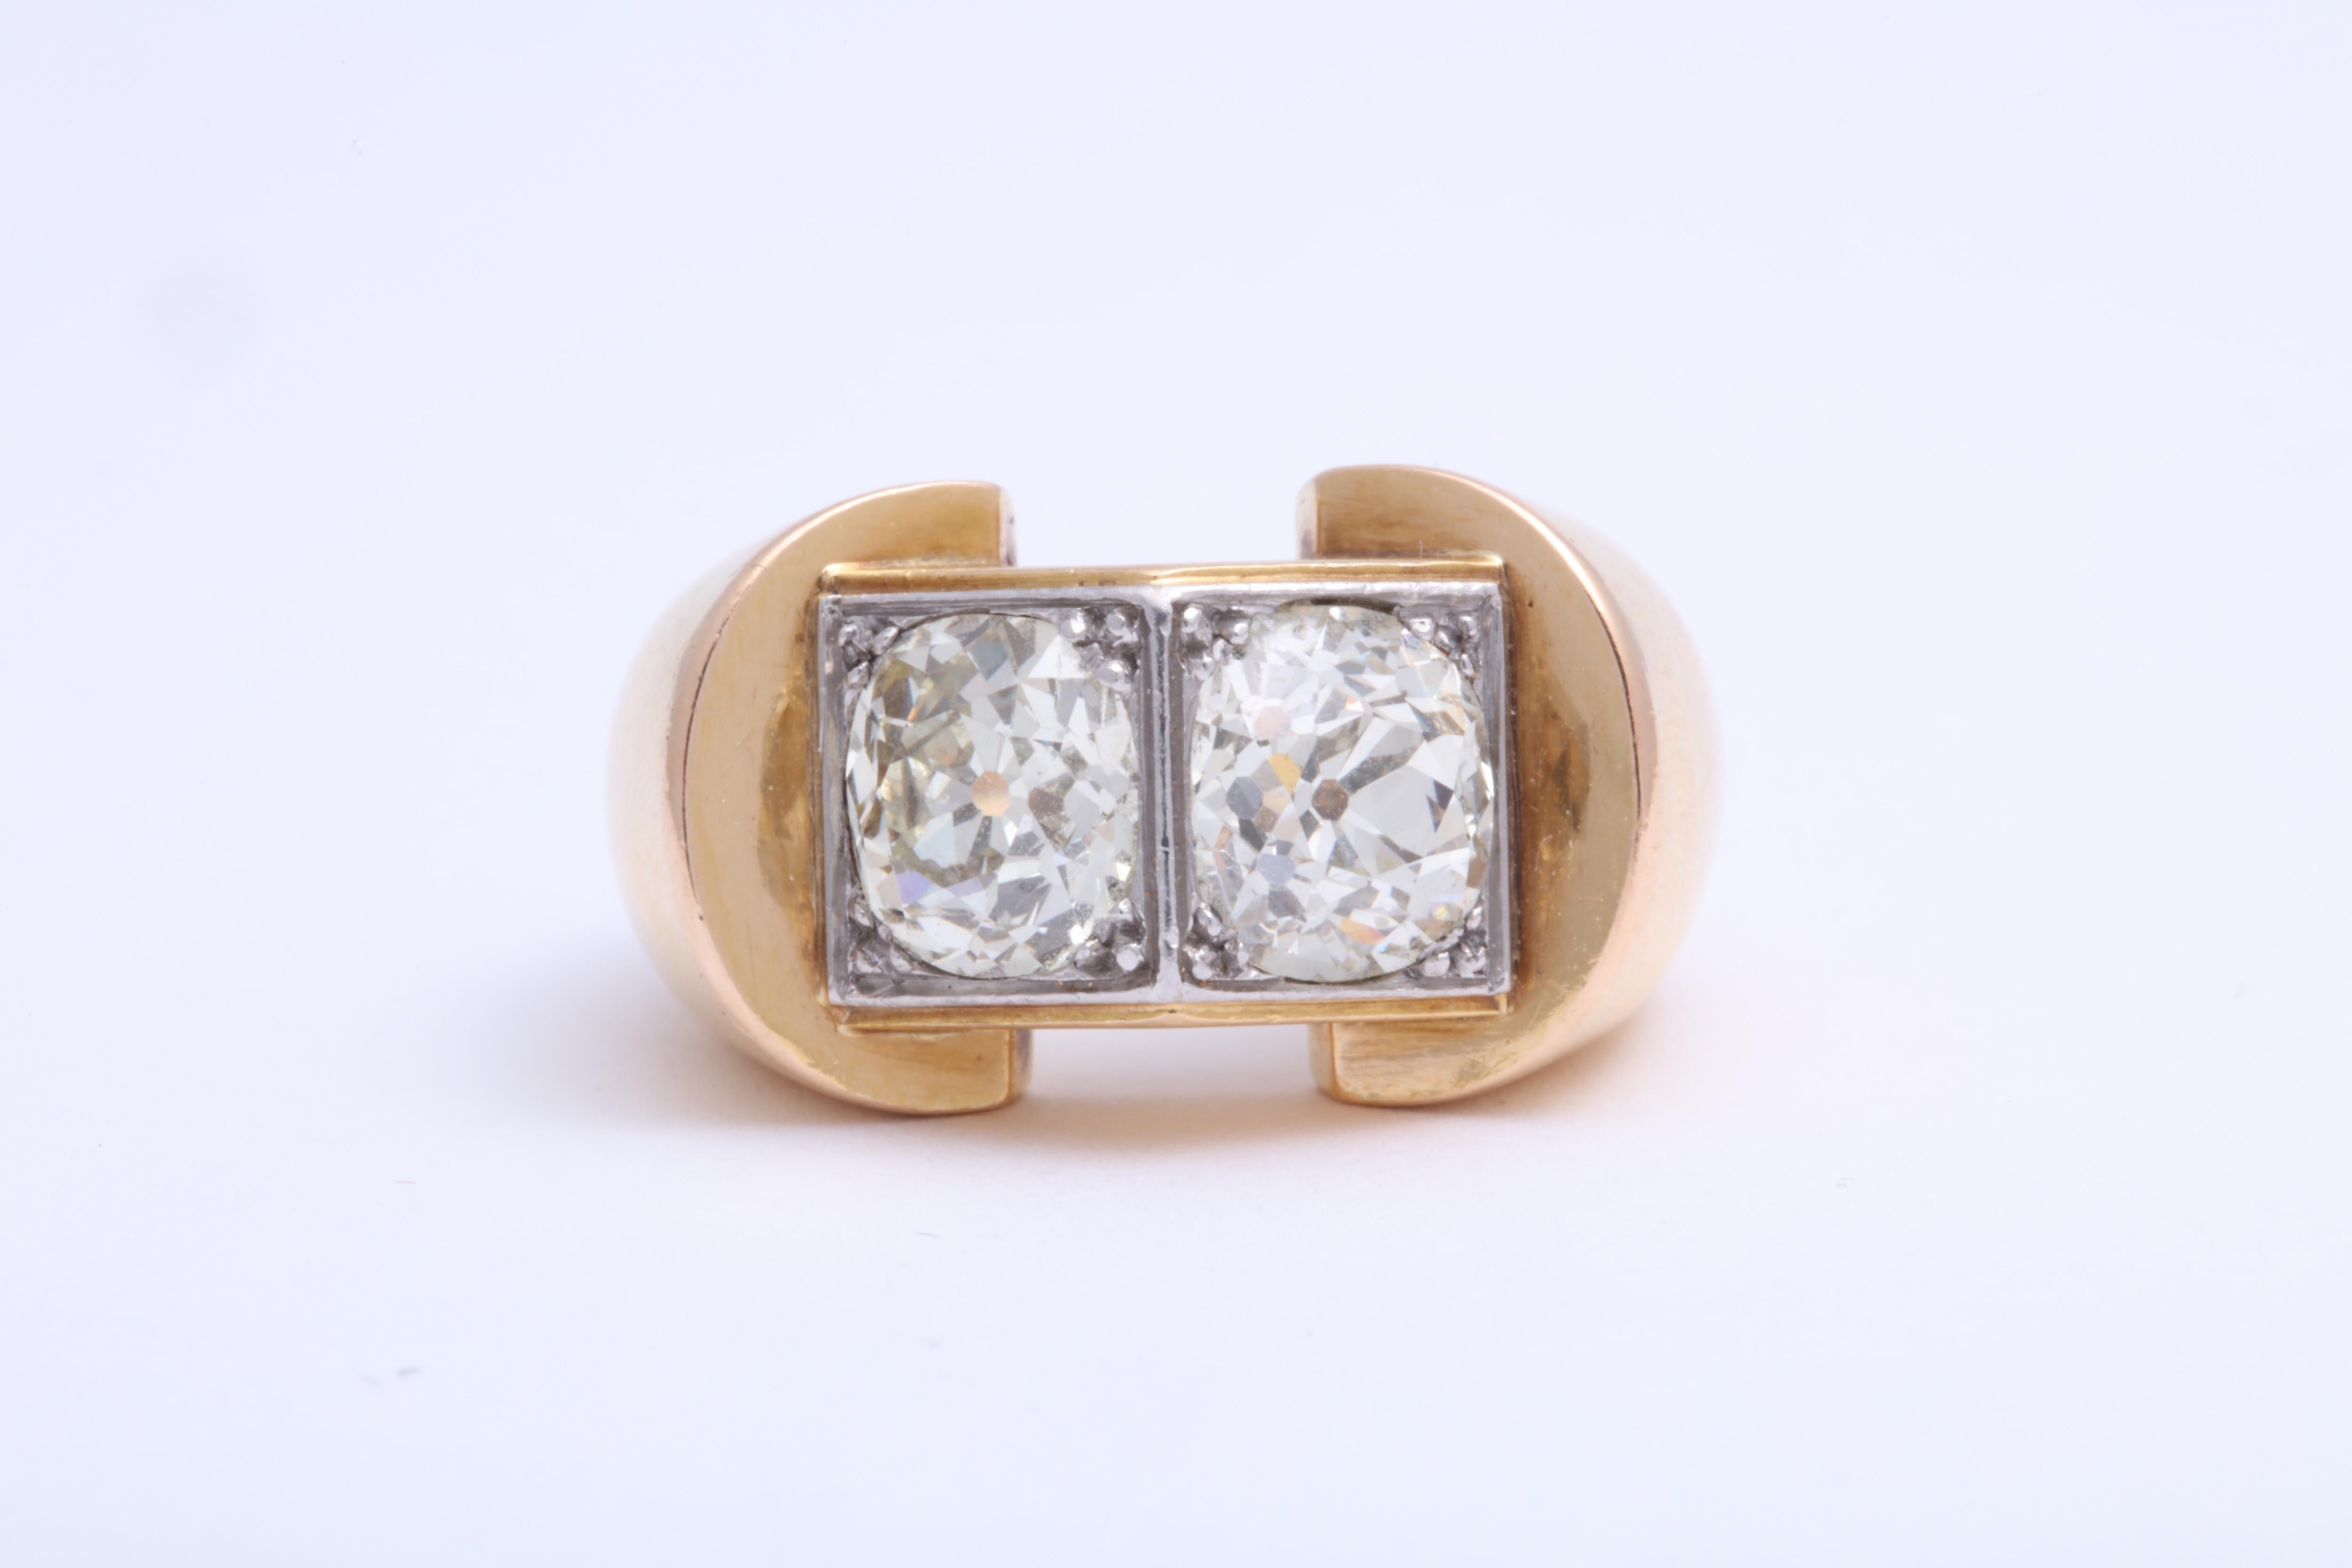 Dating to around 1940, this French 18K white gold over yellow gold cocktail ring is set with two old mine cut diamonds. Made by Rene Boivin. 